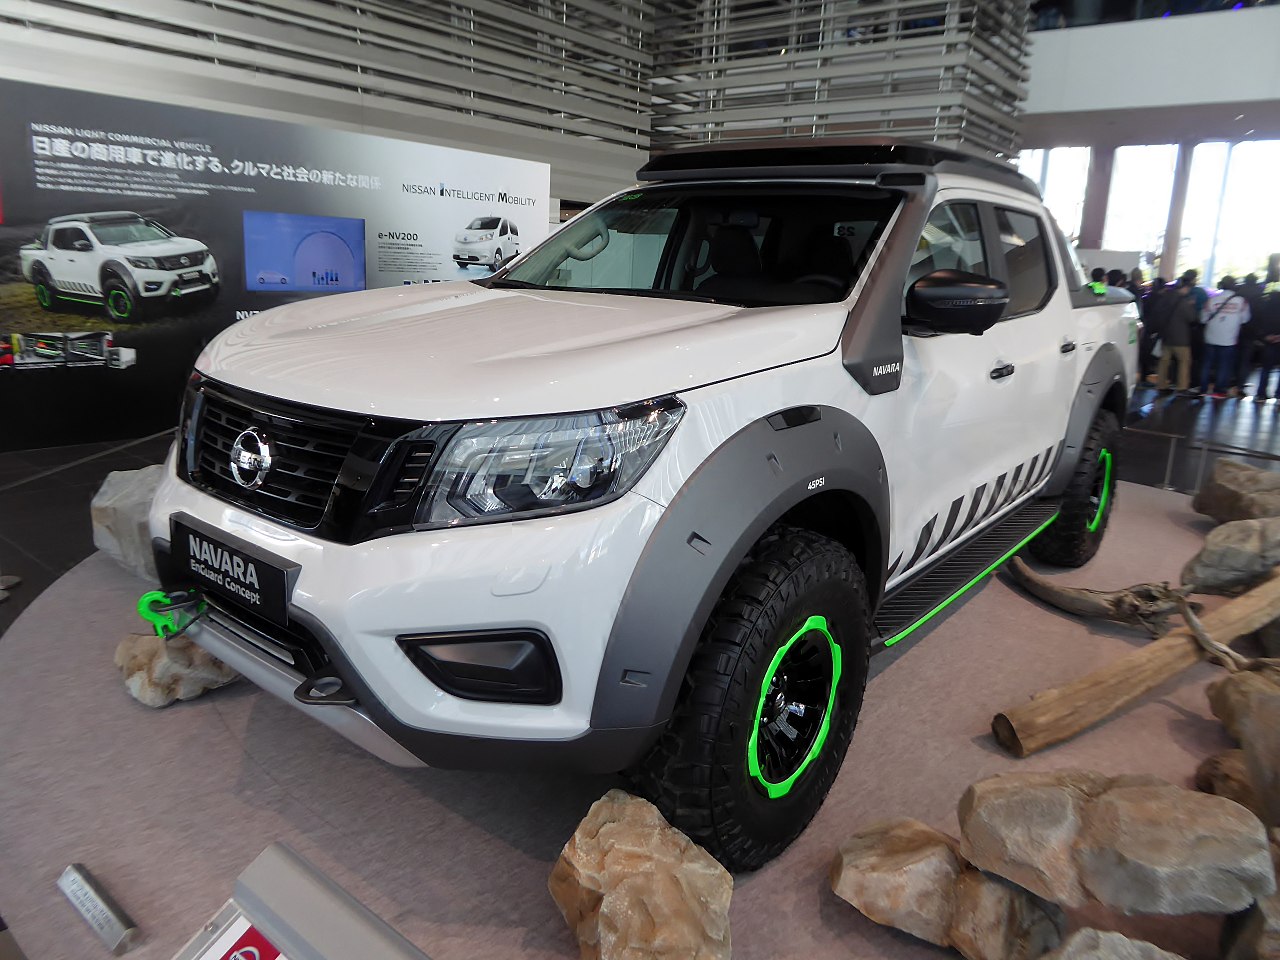 Nissan planning to take production of new Navara model to South Africa